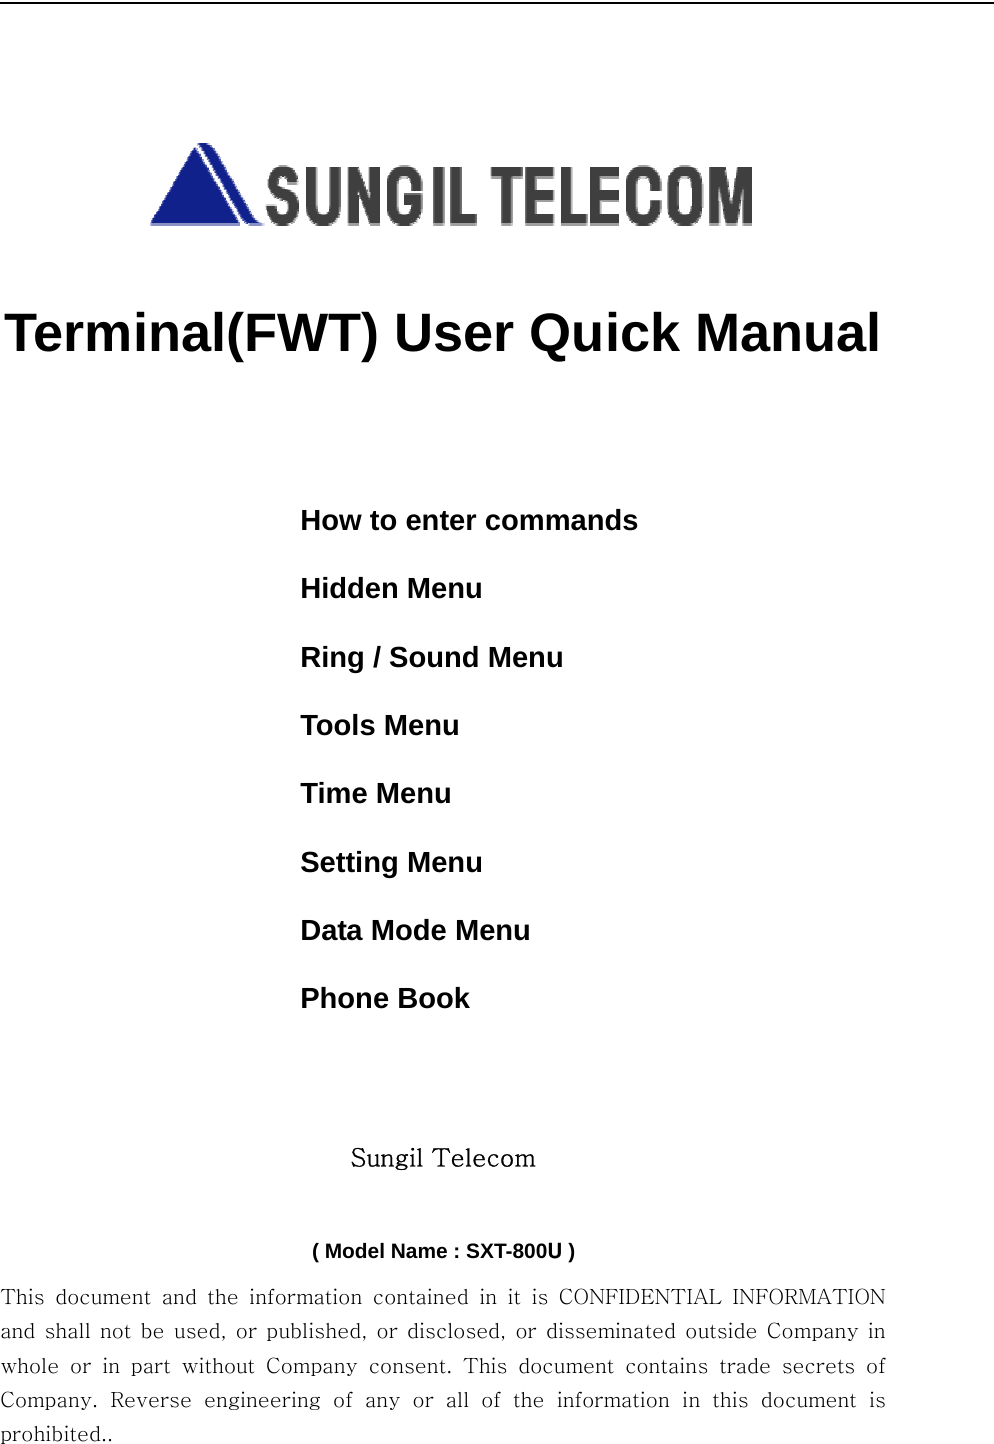          Terminal(FWT) User Quick Manual    How to enter commands Hidden Menu Ring / Sound Menu Tools Menu Time Menu Setting Menu Data Mode Menu Phone Book Sungil Telecom    ( Model Name : SXT-800U ) This  document  and  the  information  contained  in  it  is  CONFIDENTIAL  INFORMATION and shall not be used, or published, or disclosed, or disseminated outside Company in whole or in part without Company  consent.  This  document  contains  trade  secrets  of Company. Reverse engineering of any or all of the information in  this  document  is prohibited.. 